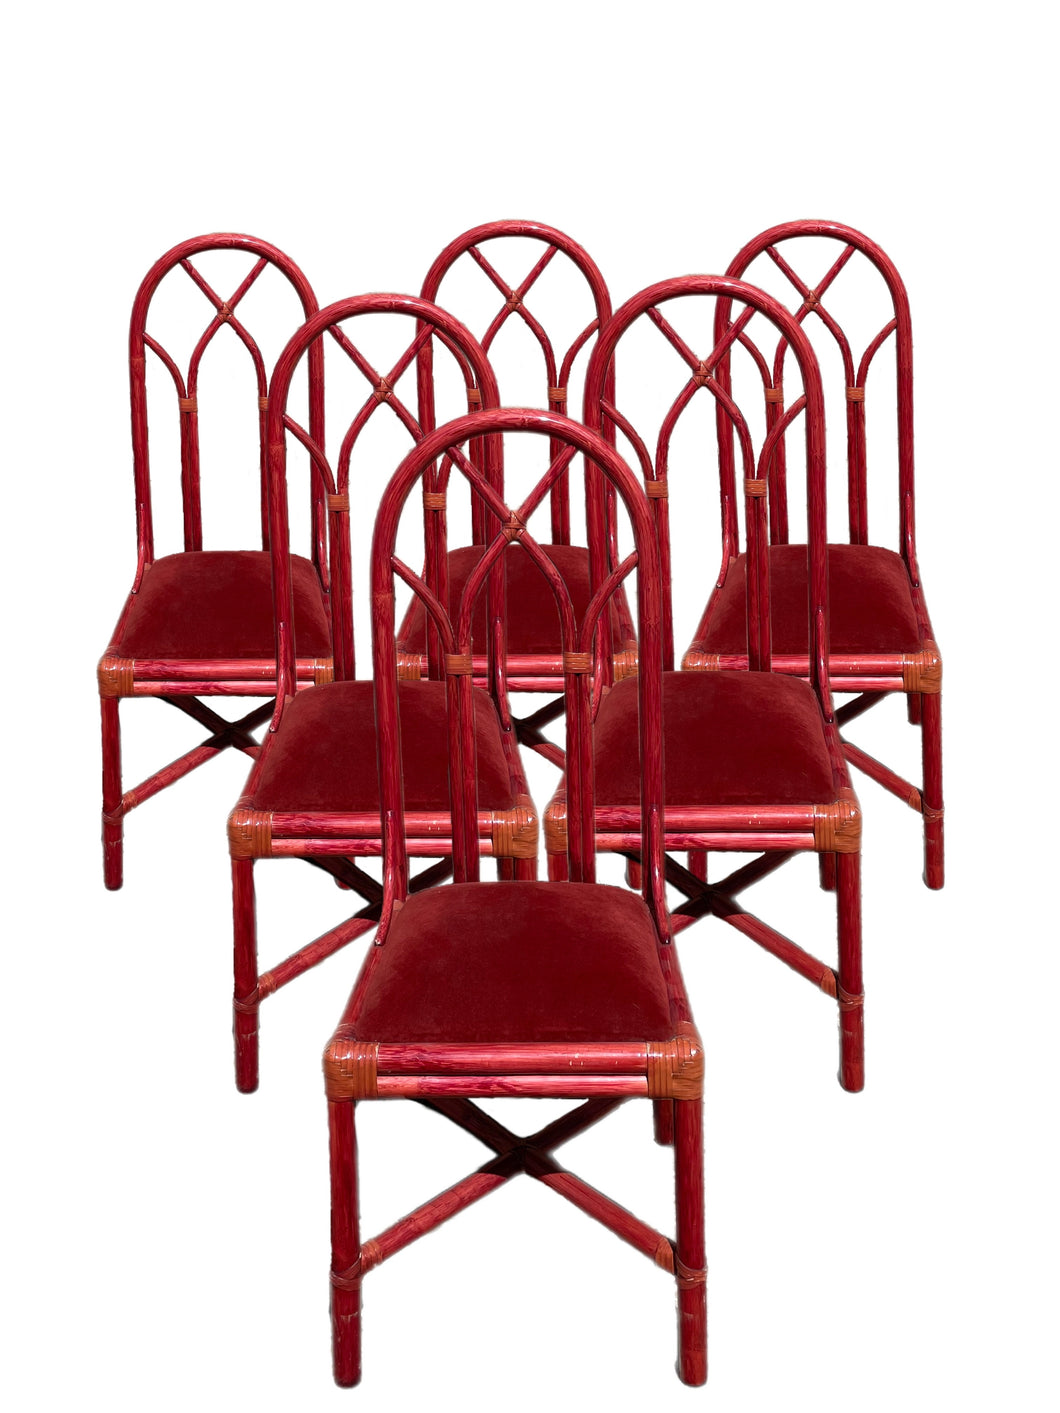 Six Vintage Bamboo Red Chairs With High Back and Red Velvet Seat Pad